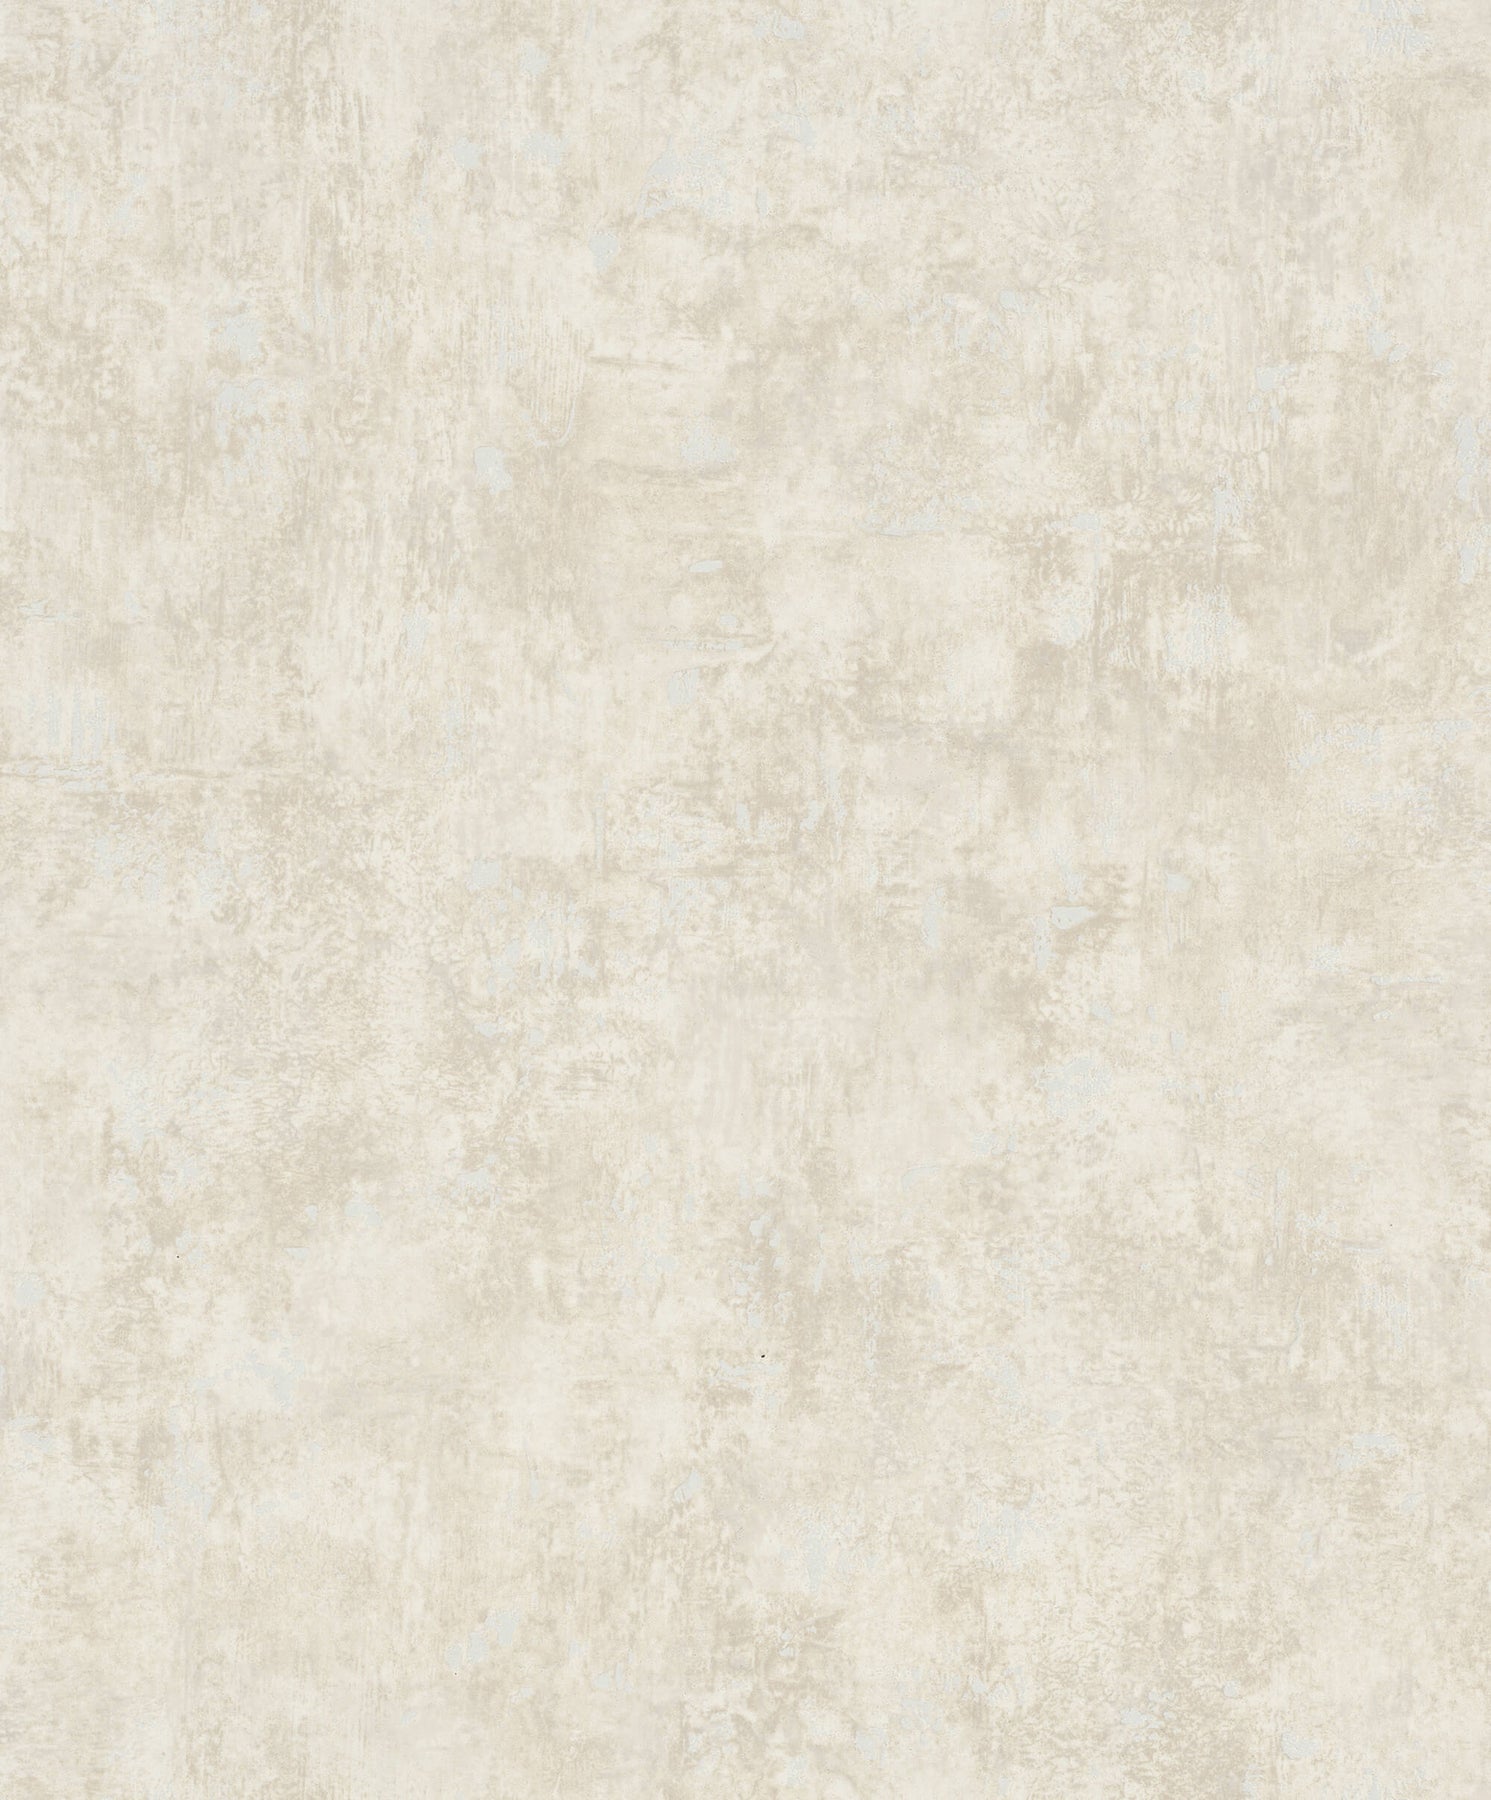 Sample Matte Texture Fleck Wallpaper in Beige from the Olio Collection ...